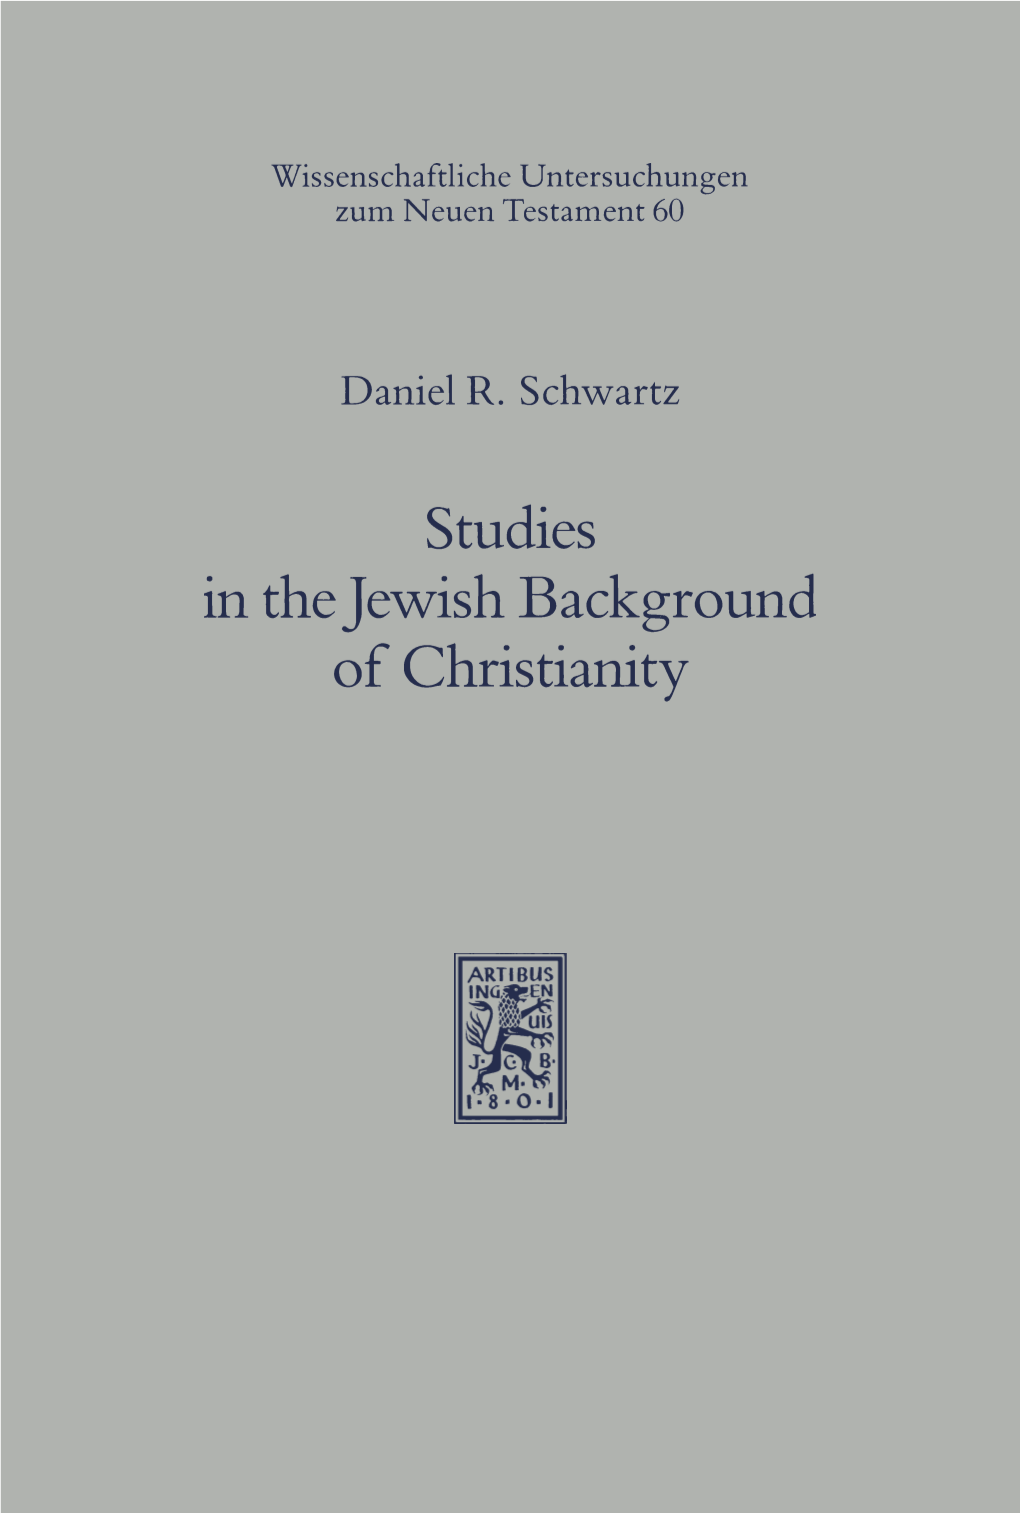 Studies in the Jewish Background of Christianity